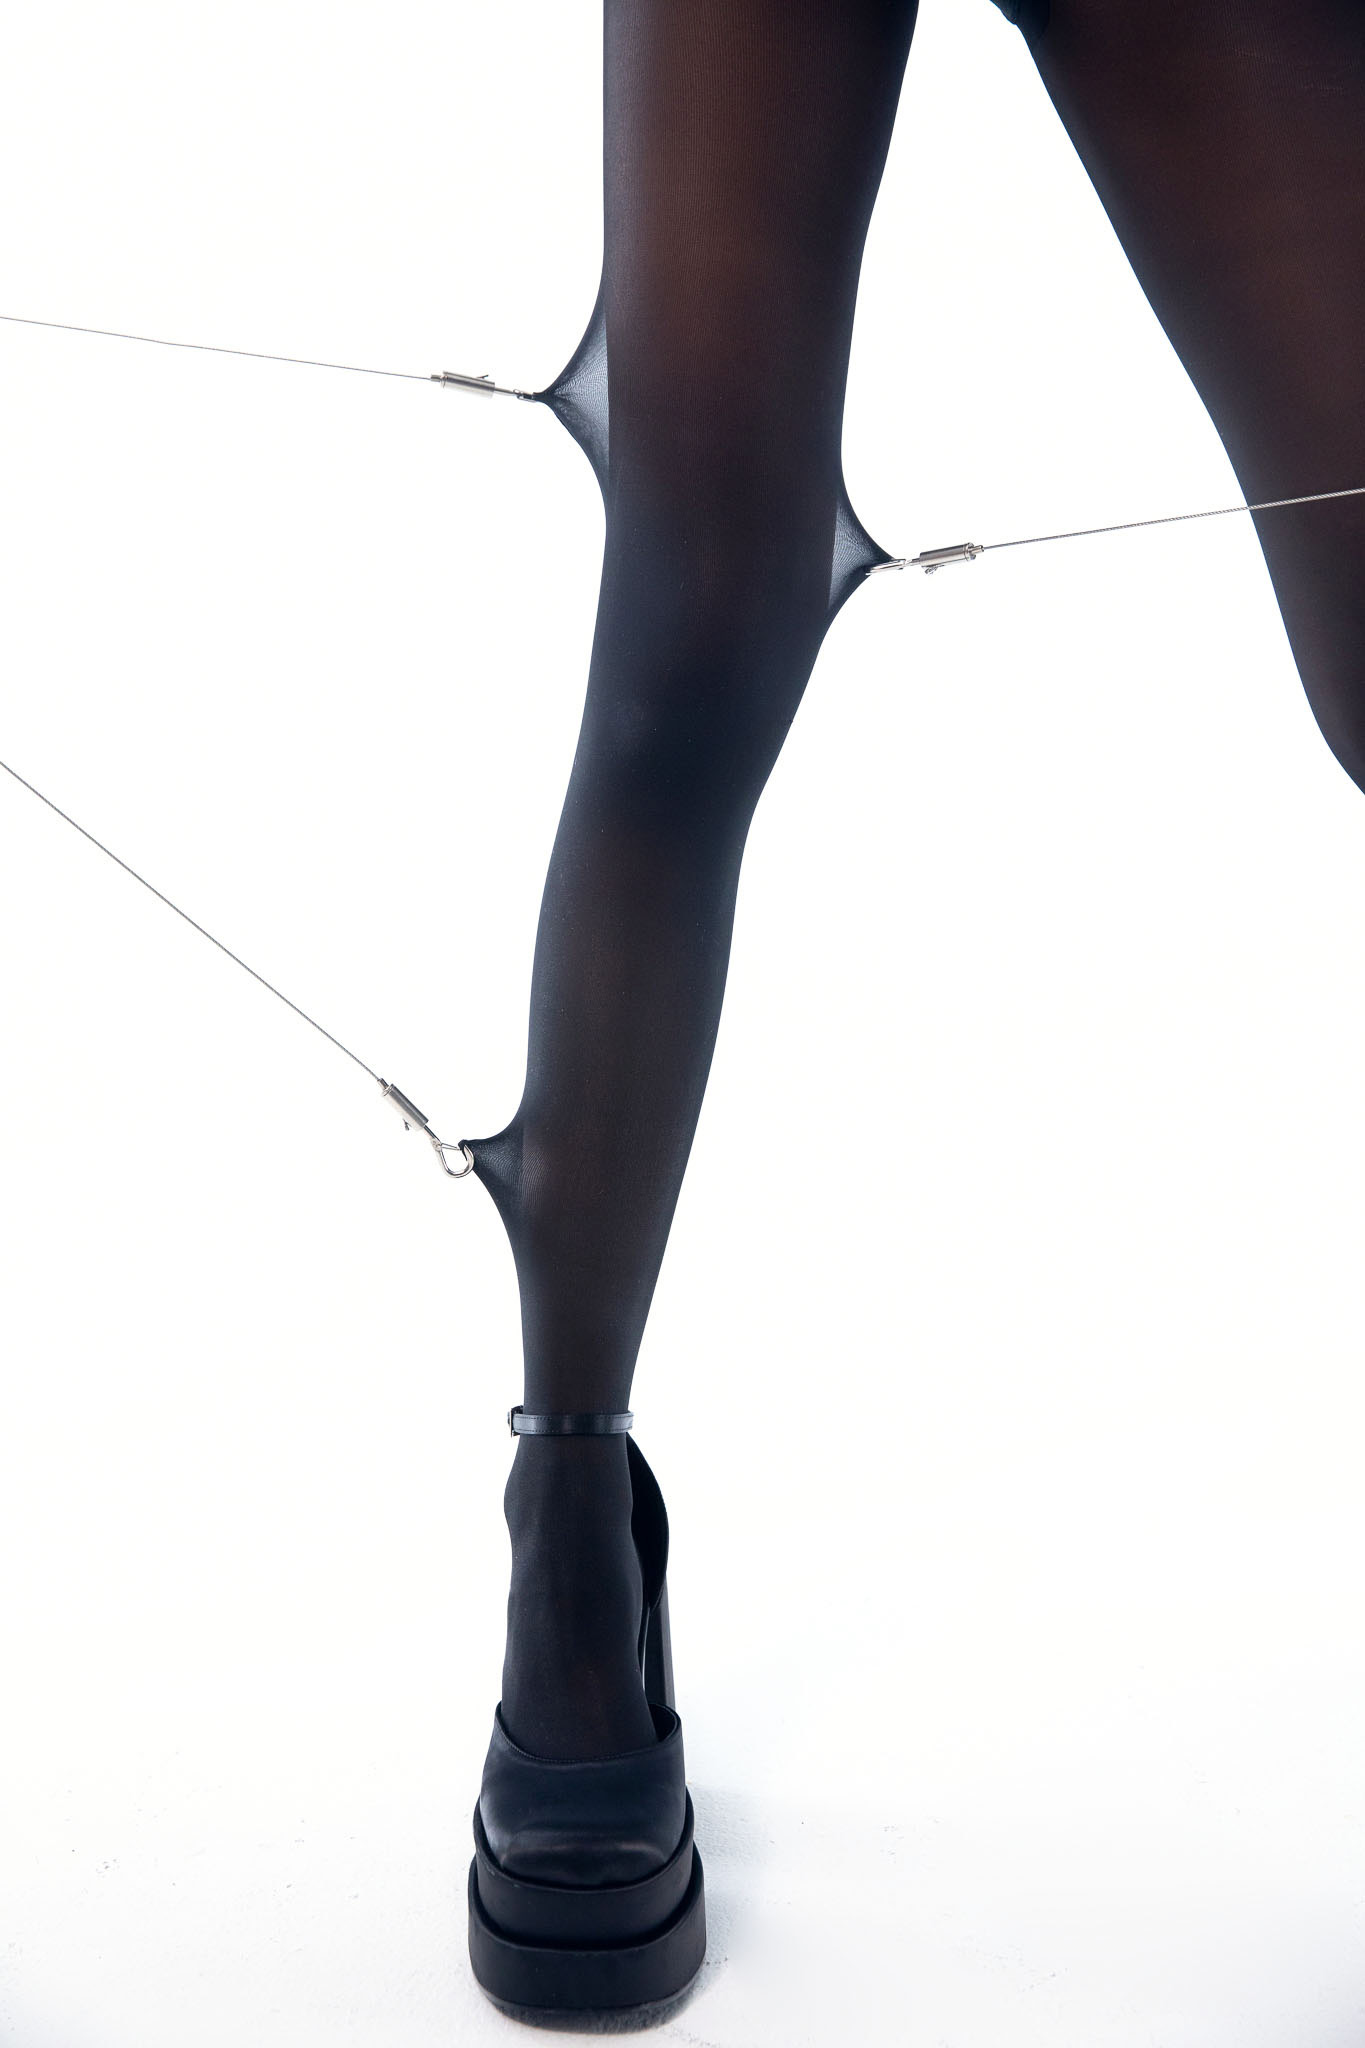 close-up of leg with Sheertex indestructible tights being pulled by clamps in 3 directions